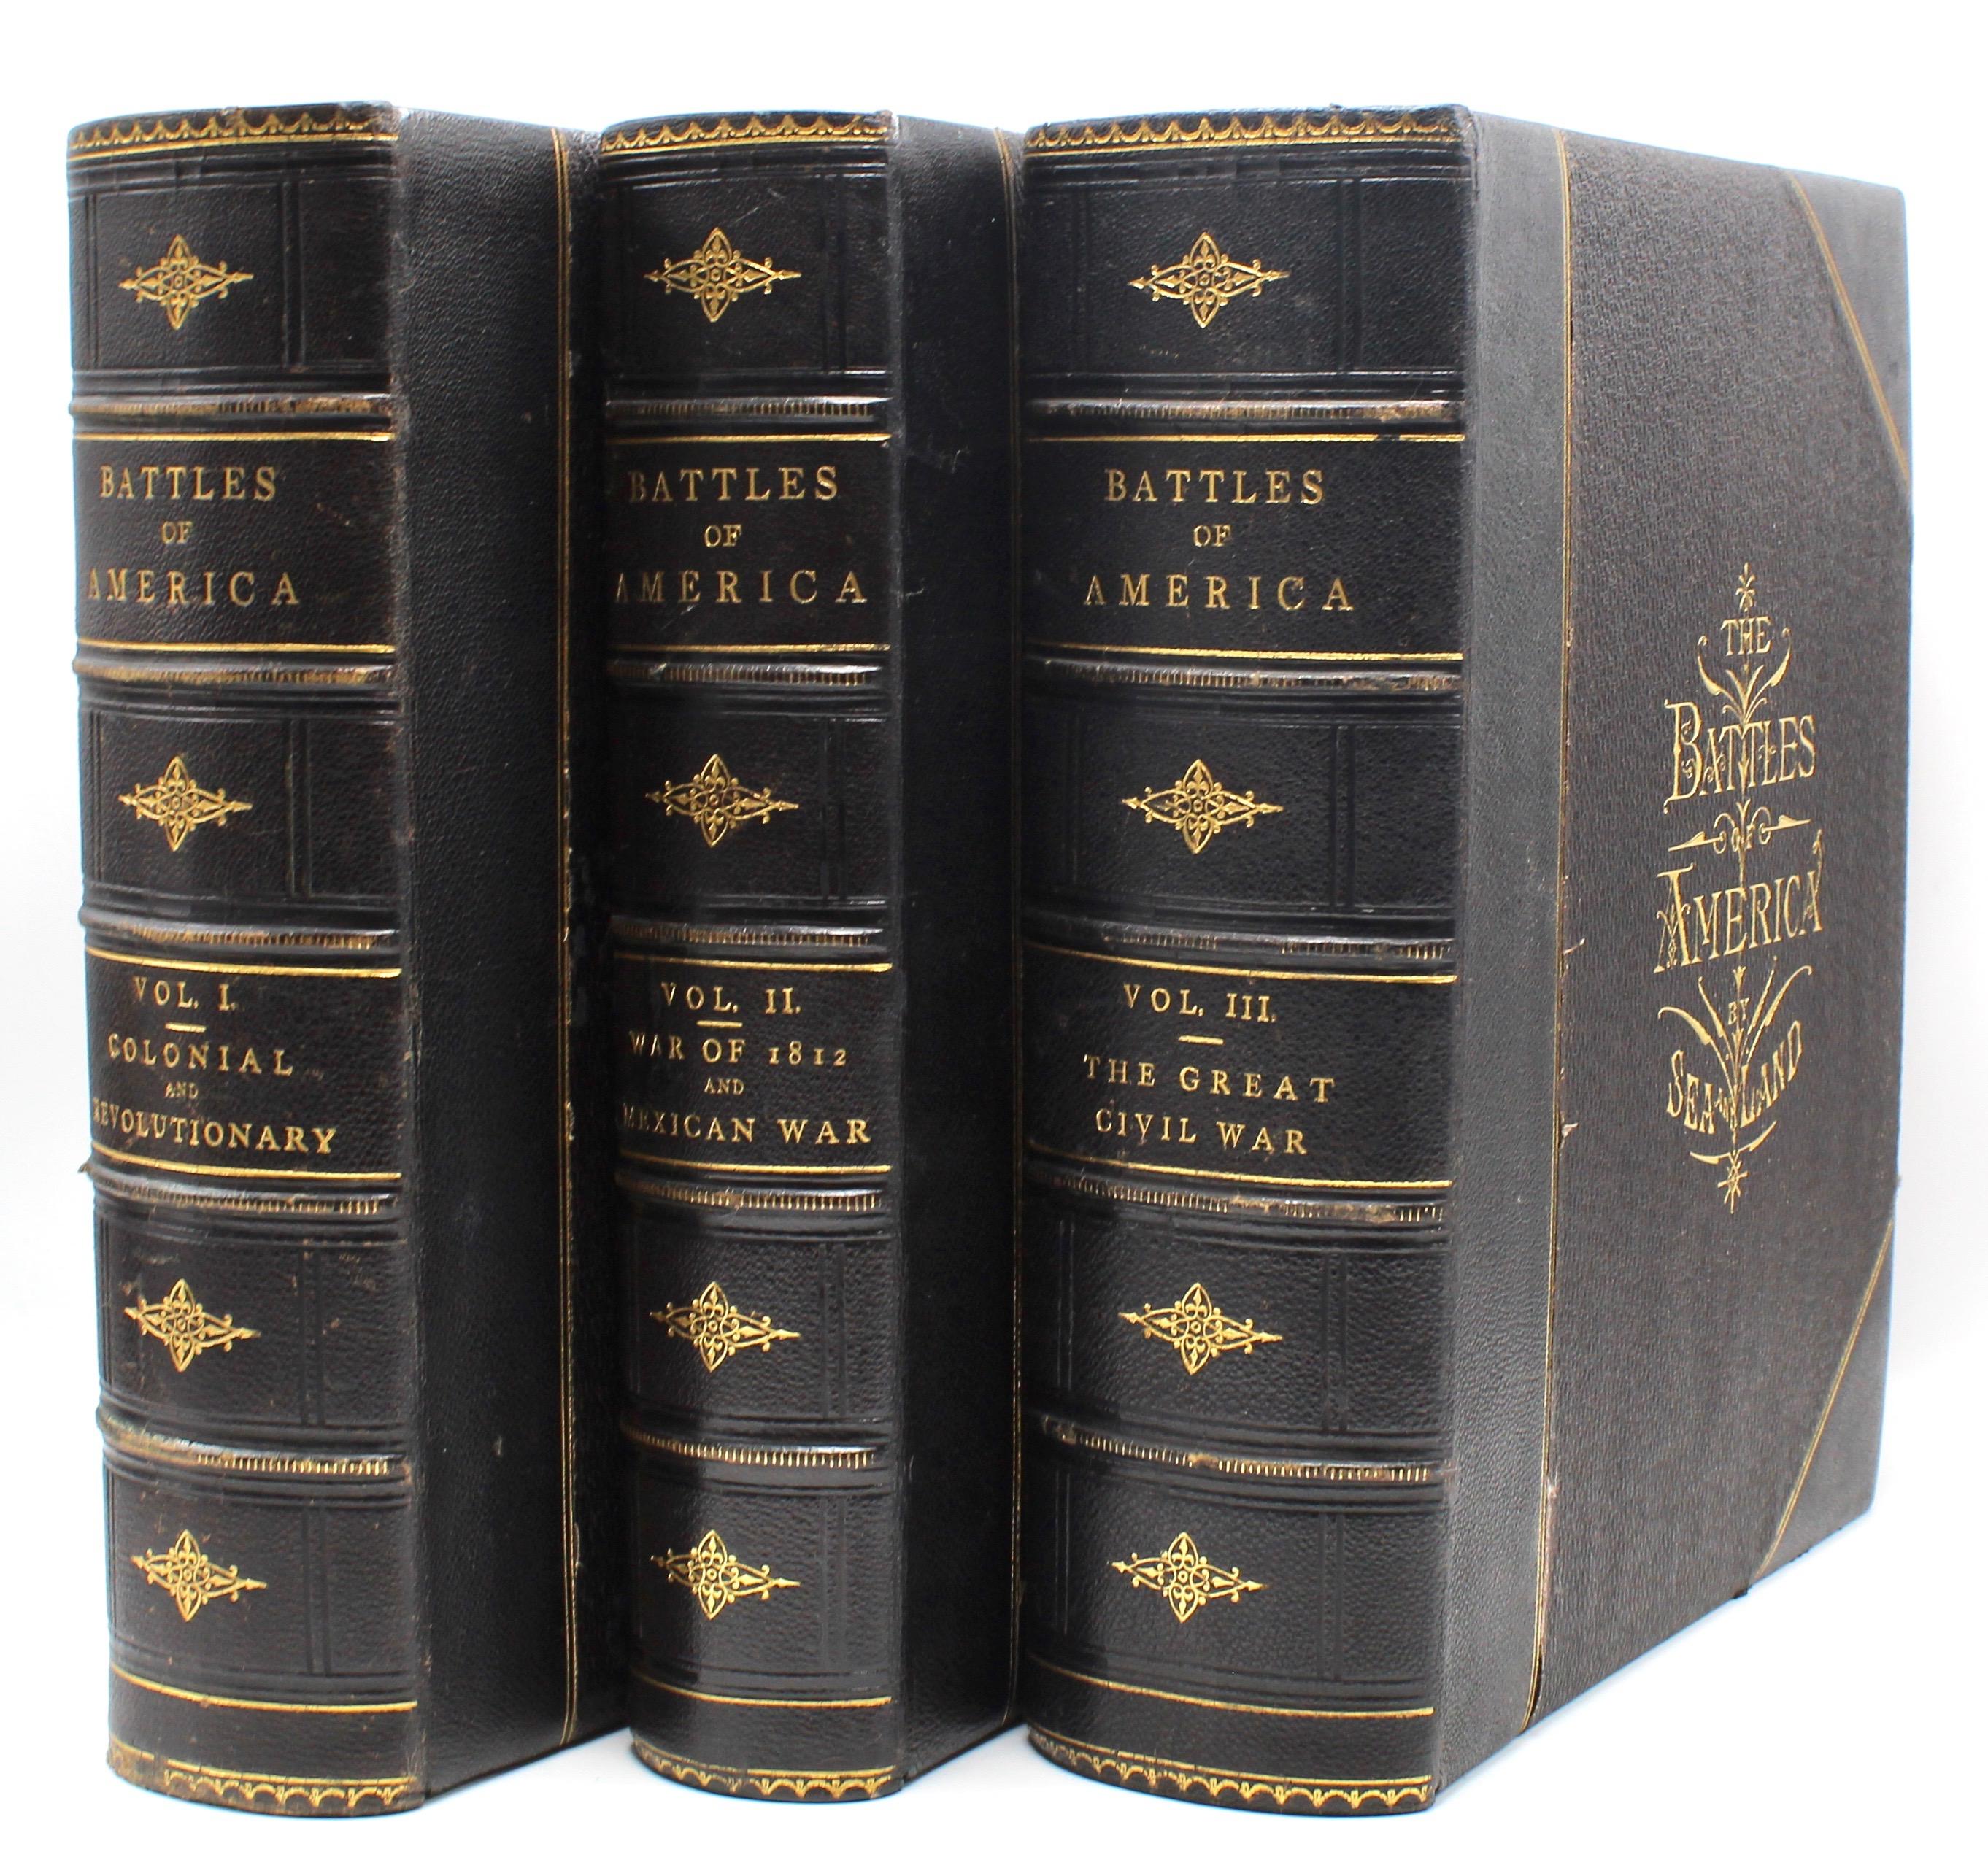 Tomes, Robert and John Laird Wilson. The Battles of America by Sea and Land. New York: Patterson & Neilson, 1878. Thick quarto three volume set, bound in 3/4 black leather with gilt titles and tooling. 

Presented is an early edition of Robert